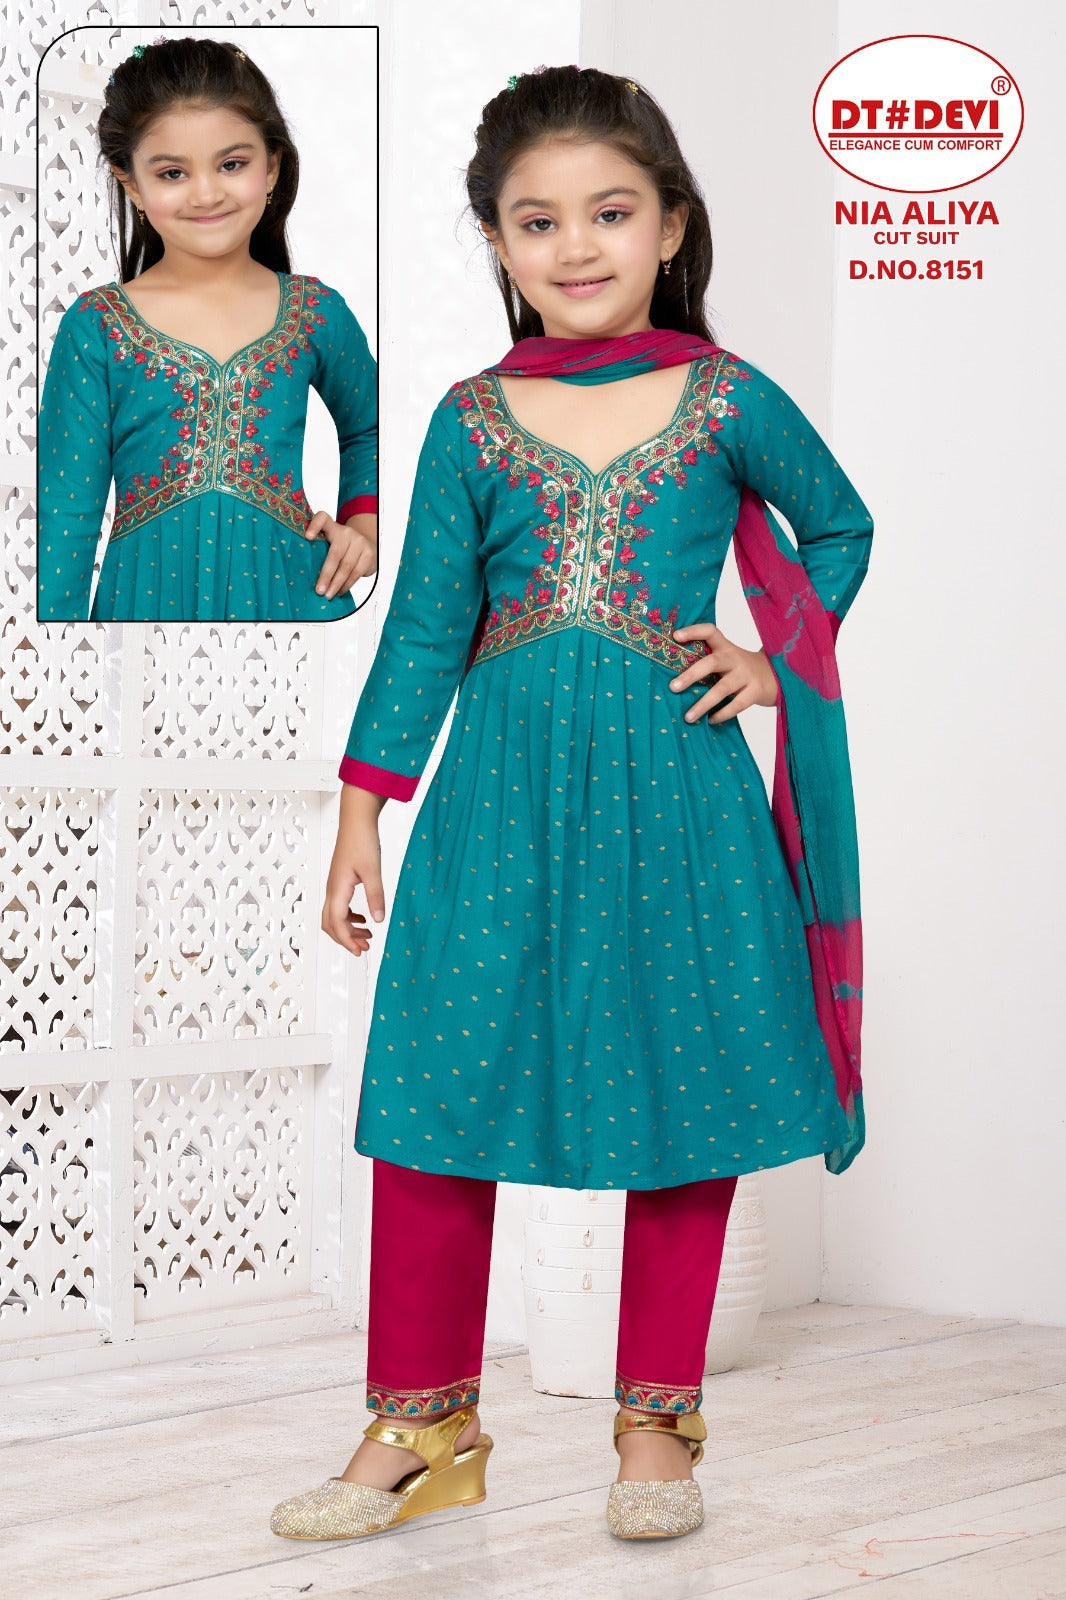 Nia-8151 Dt Devi Rayon Girls Readymade Pant Suits